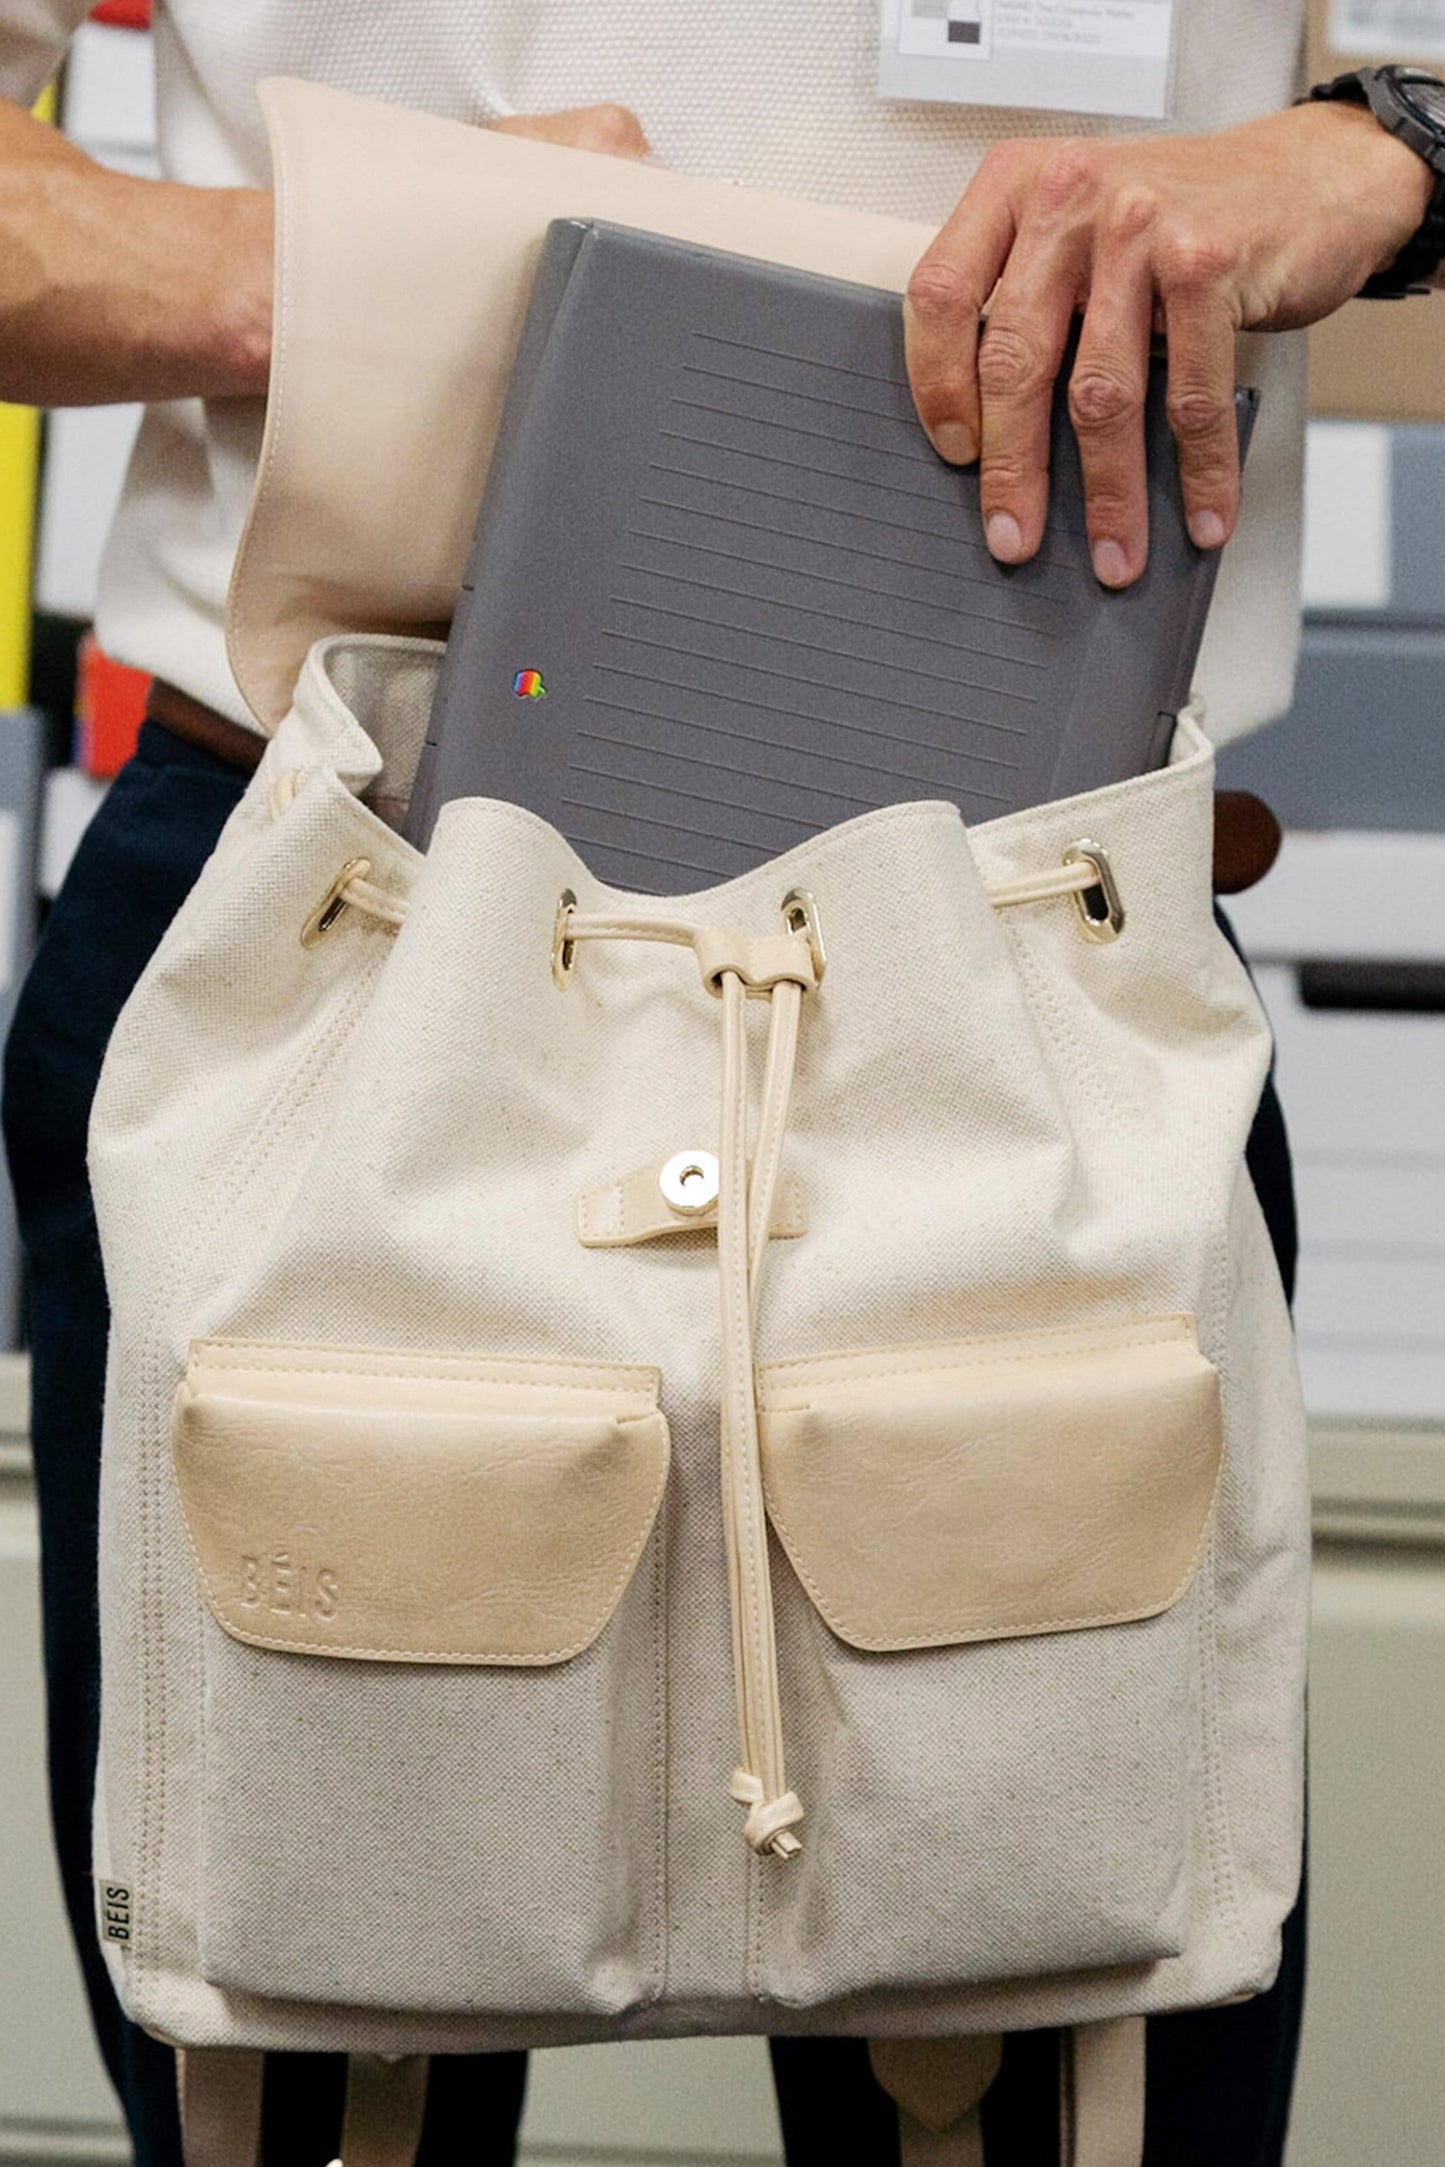 Rucksack in Beige Front with Retro Apple Laptop in Office